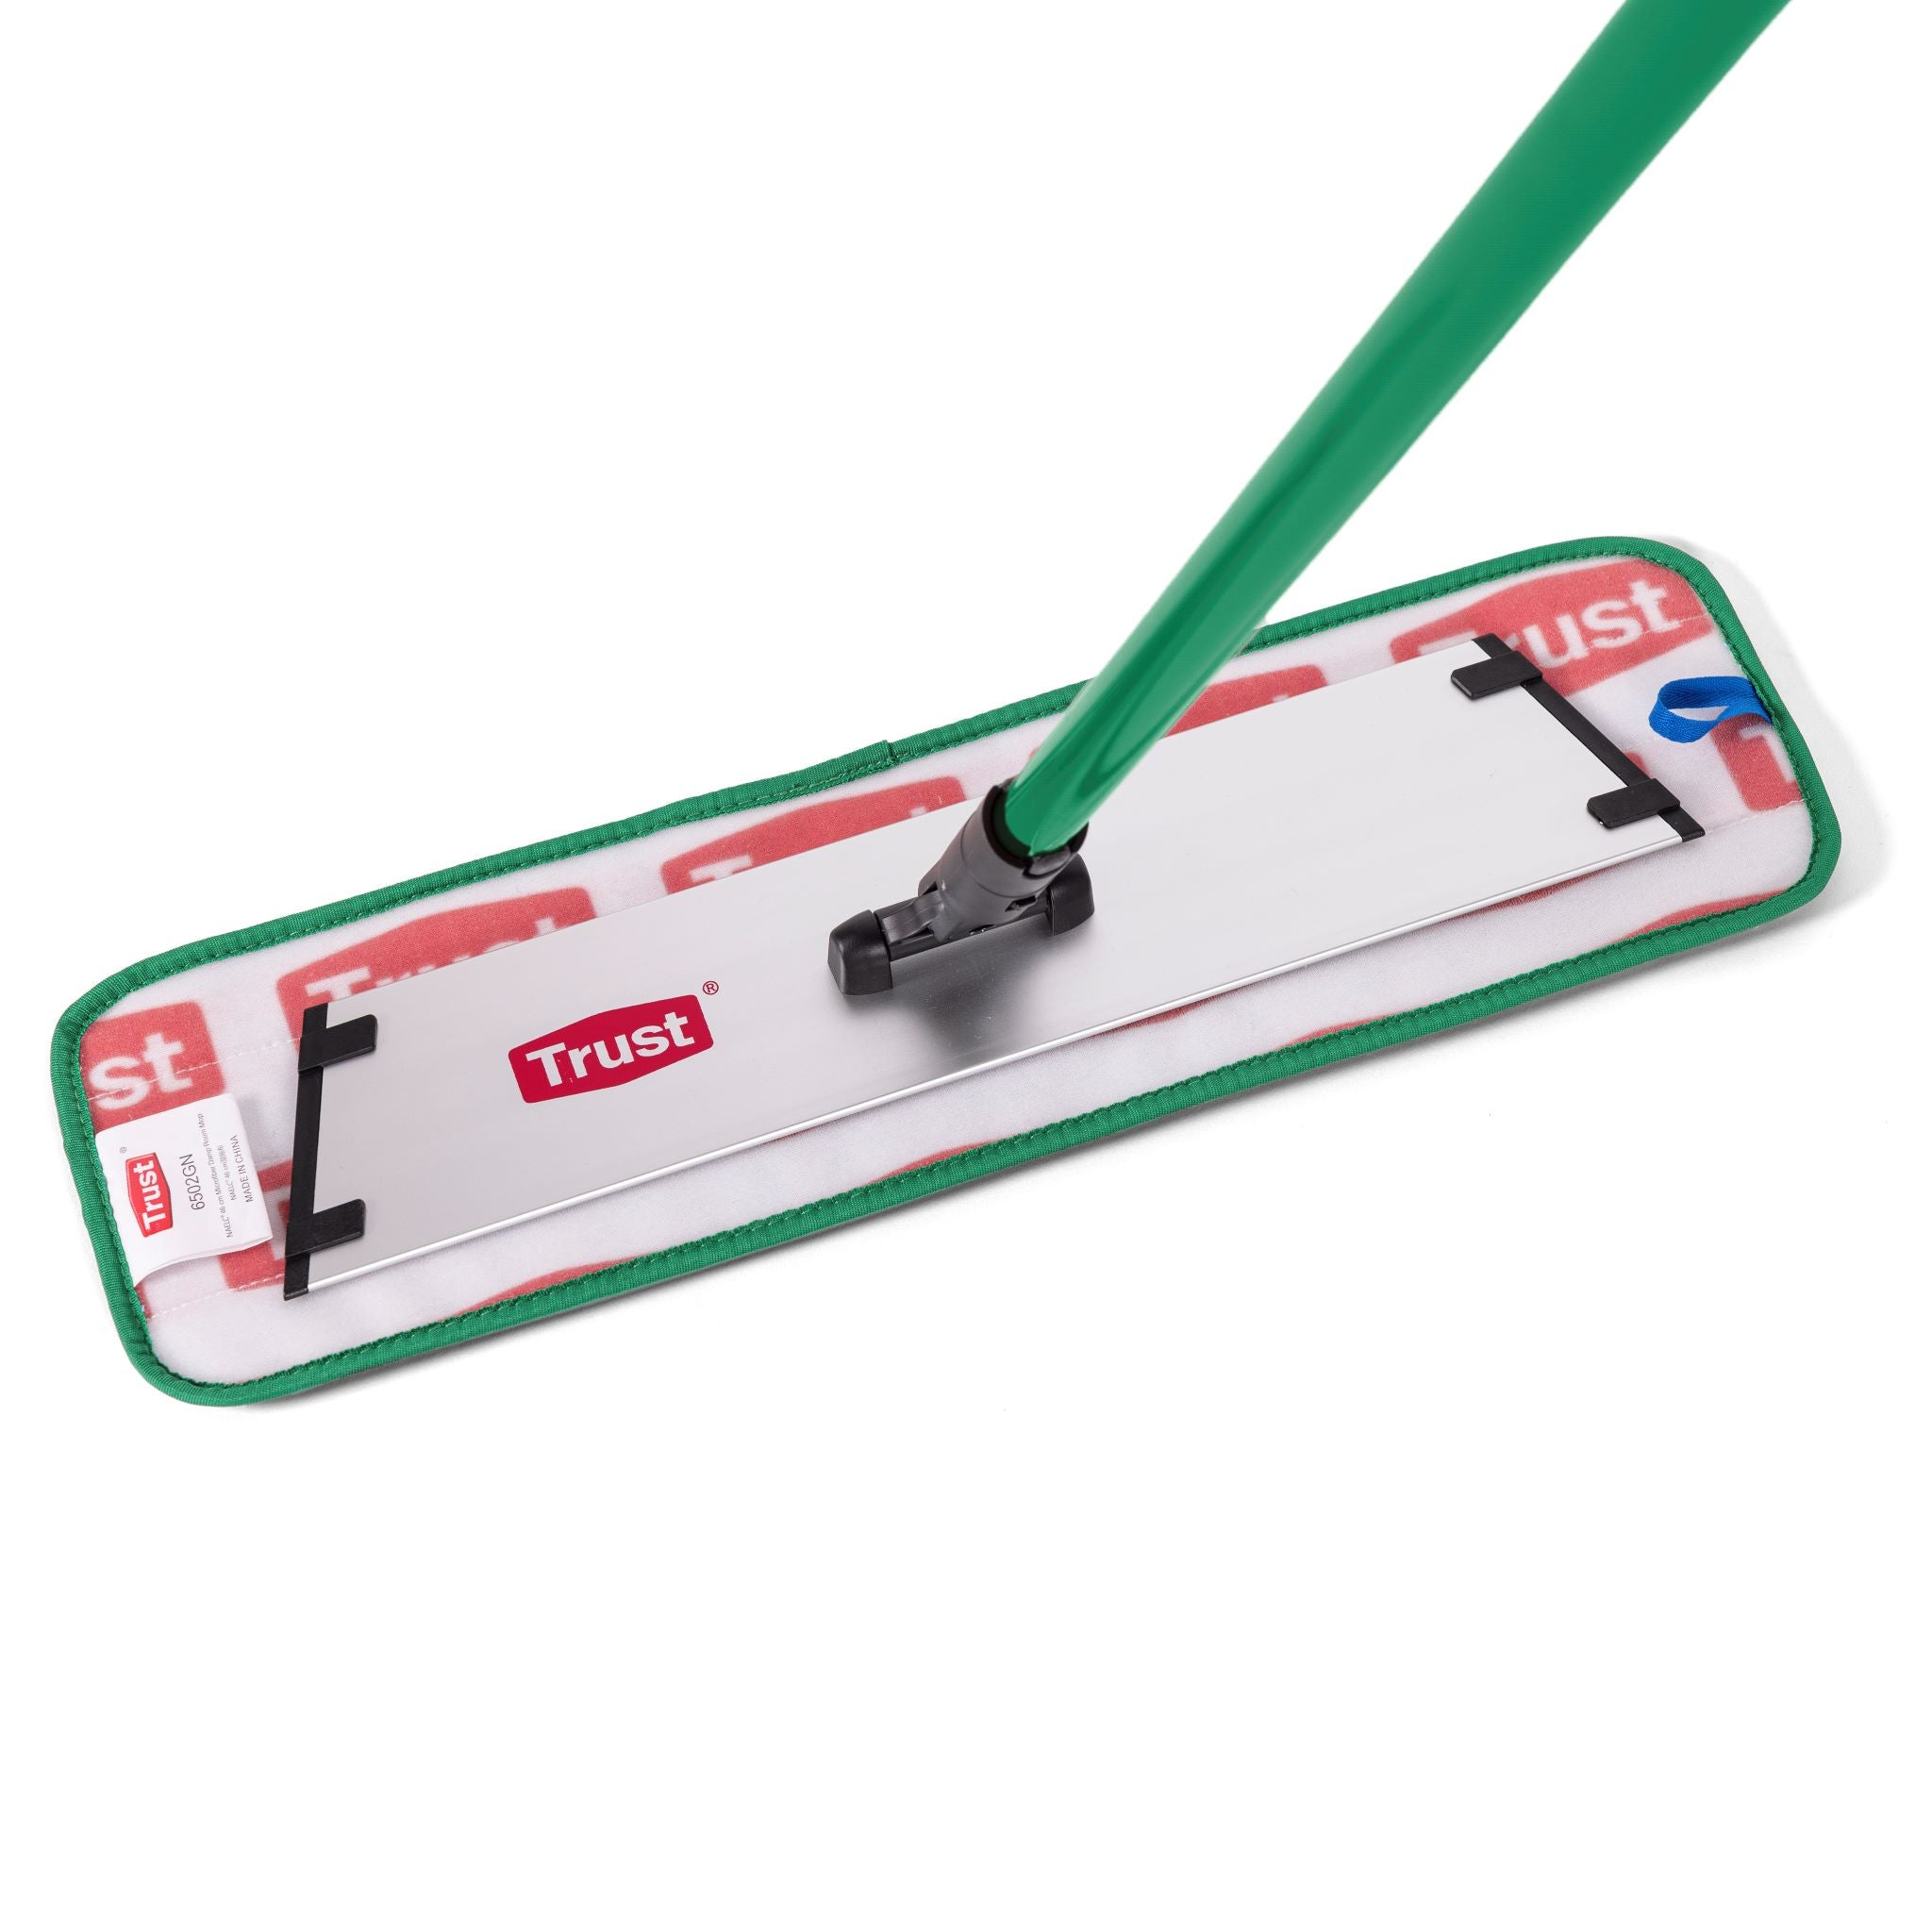 TRUST NAELC Quick Connect Handle - Green